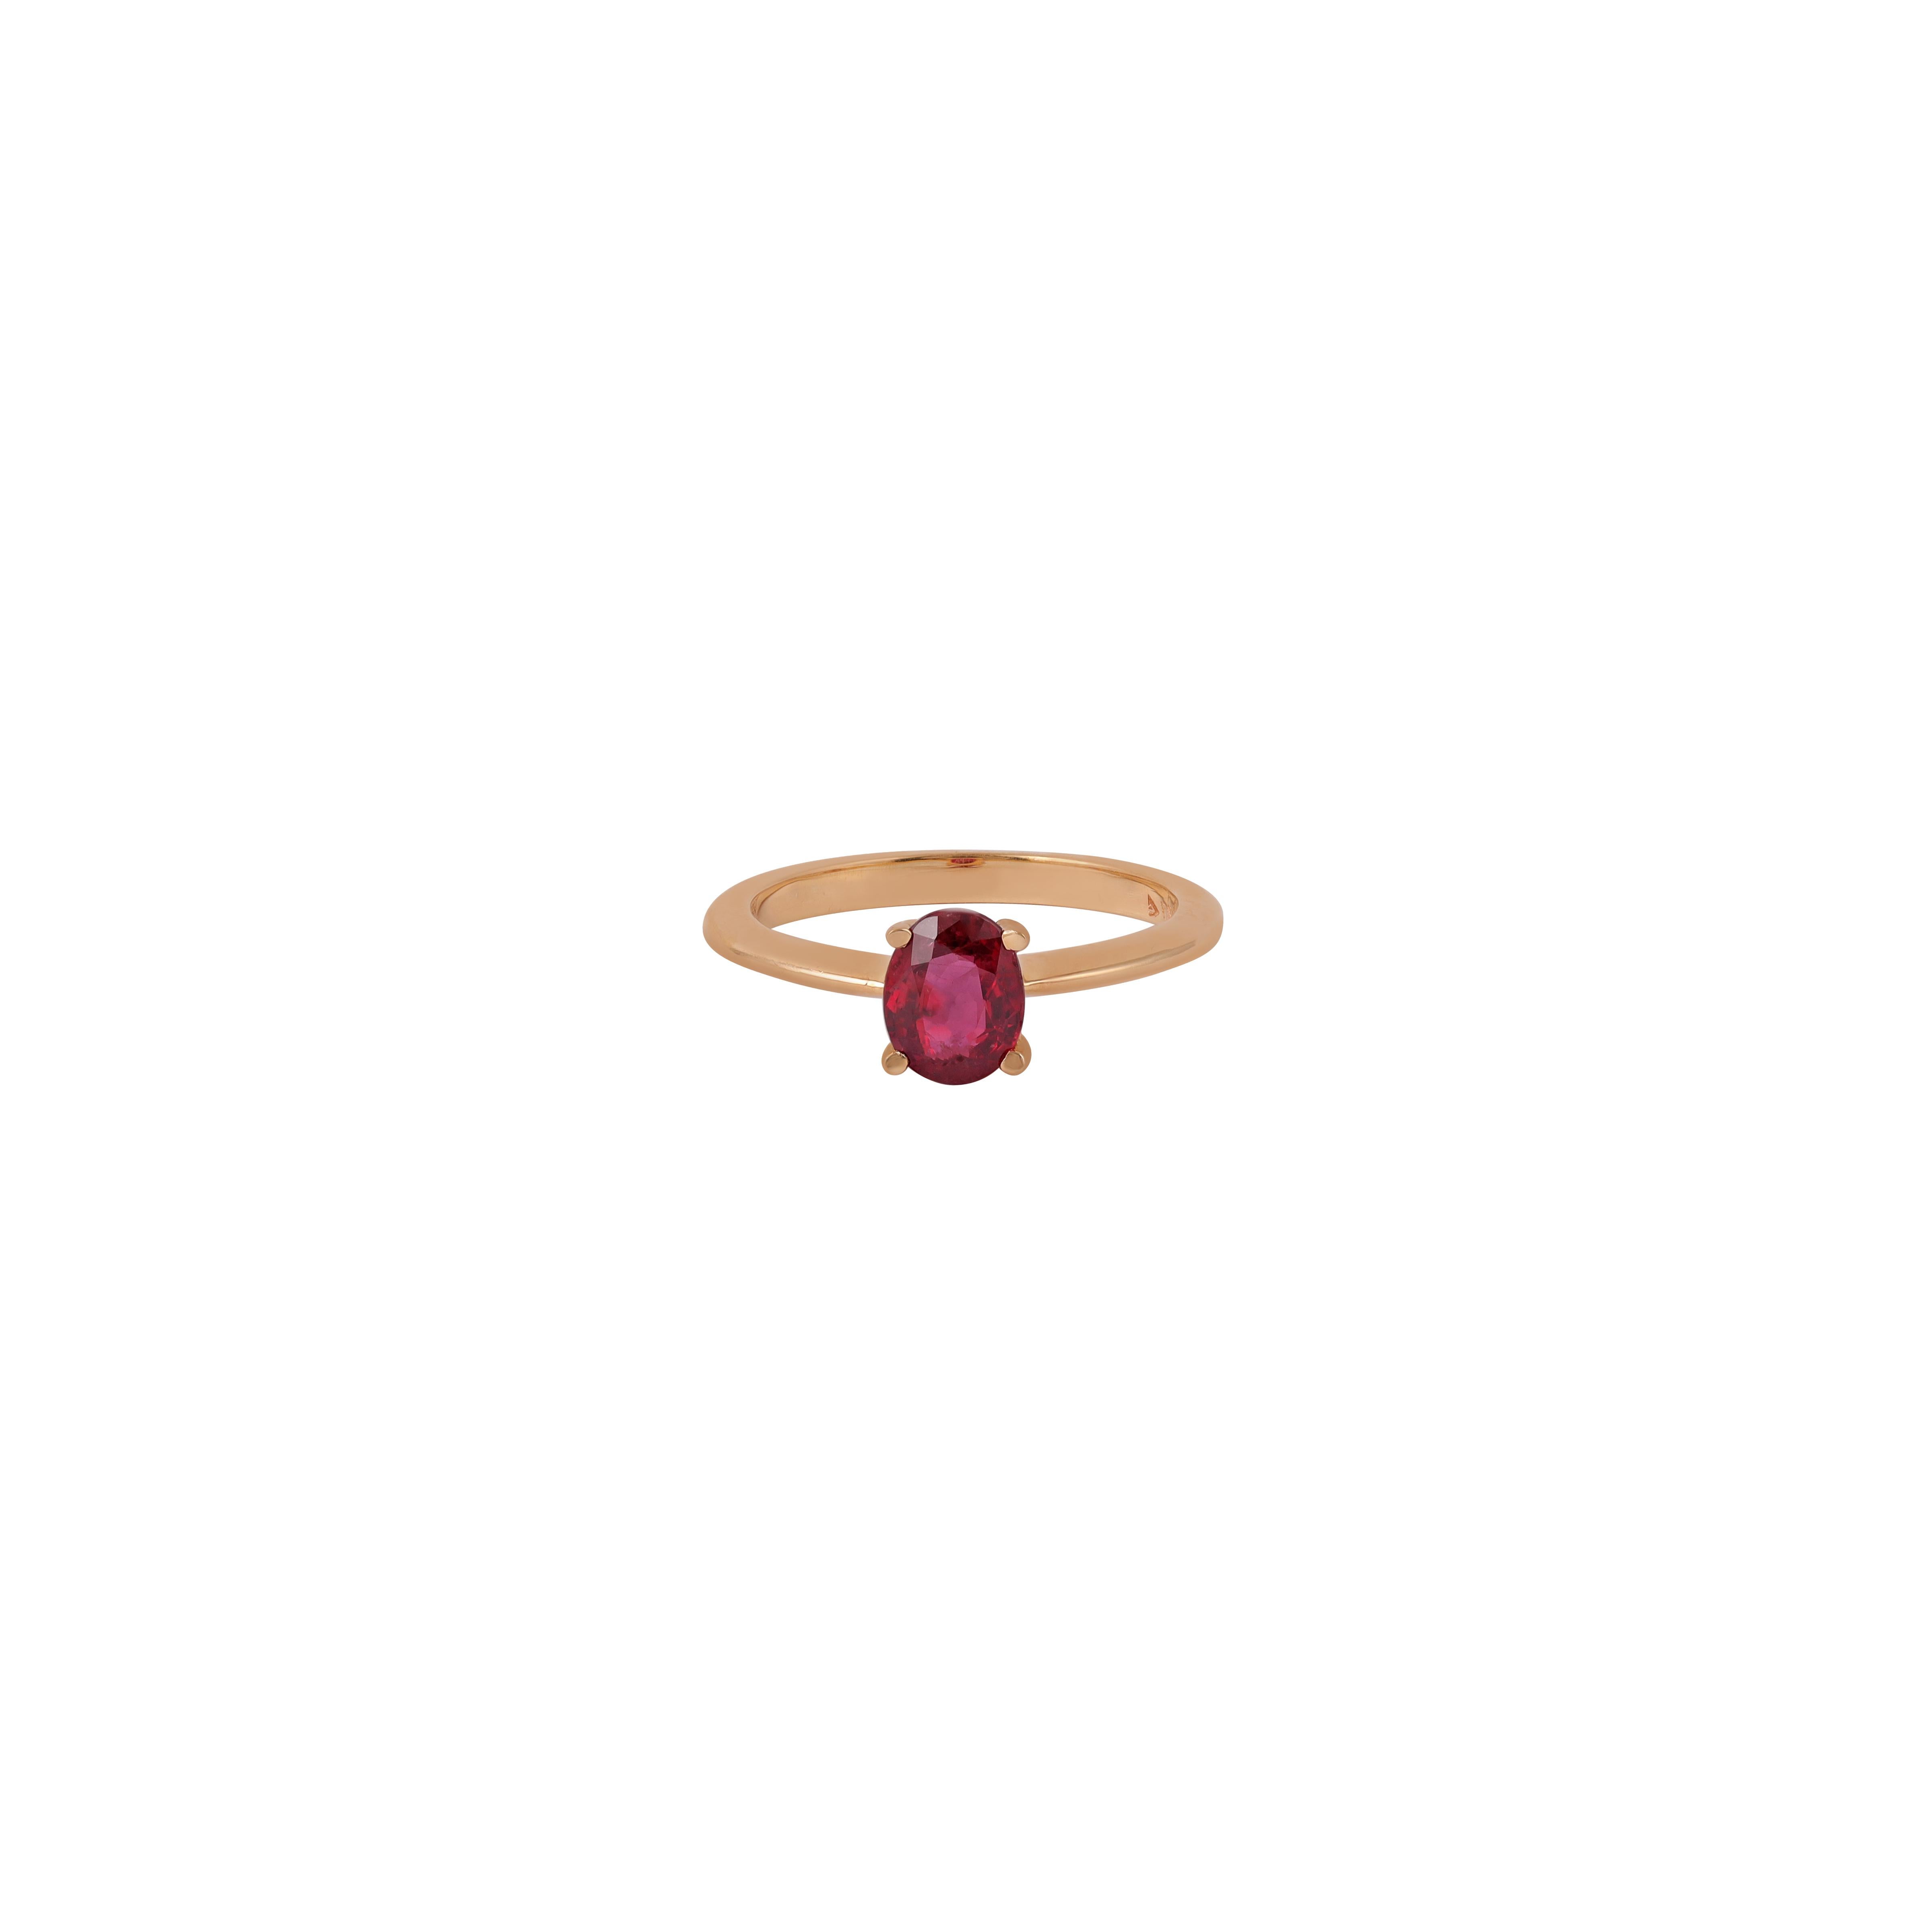 Magnificent ruby High brilliance, Round faceted, natural 0.99 carats ruby mounted in high profile. Handcrafted masterpiece design set in high polished 18 karats Yellow gold.
Statement piece!

Ruby: 0.99 carats, Mozambique, high brilliance

Size: 6